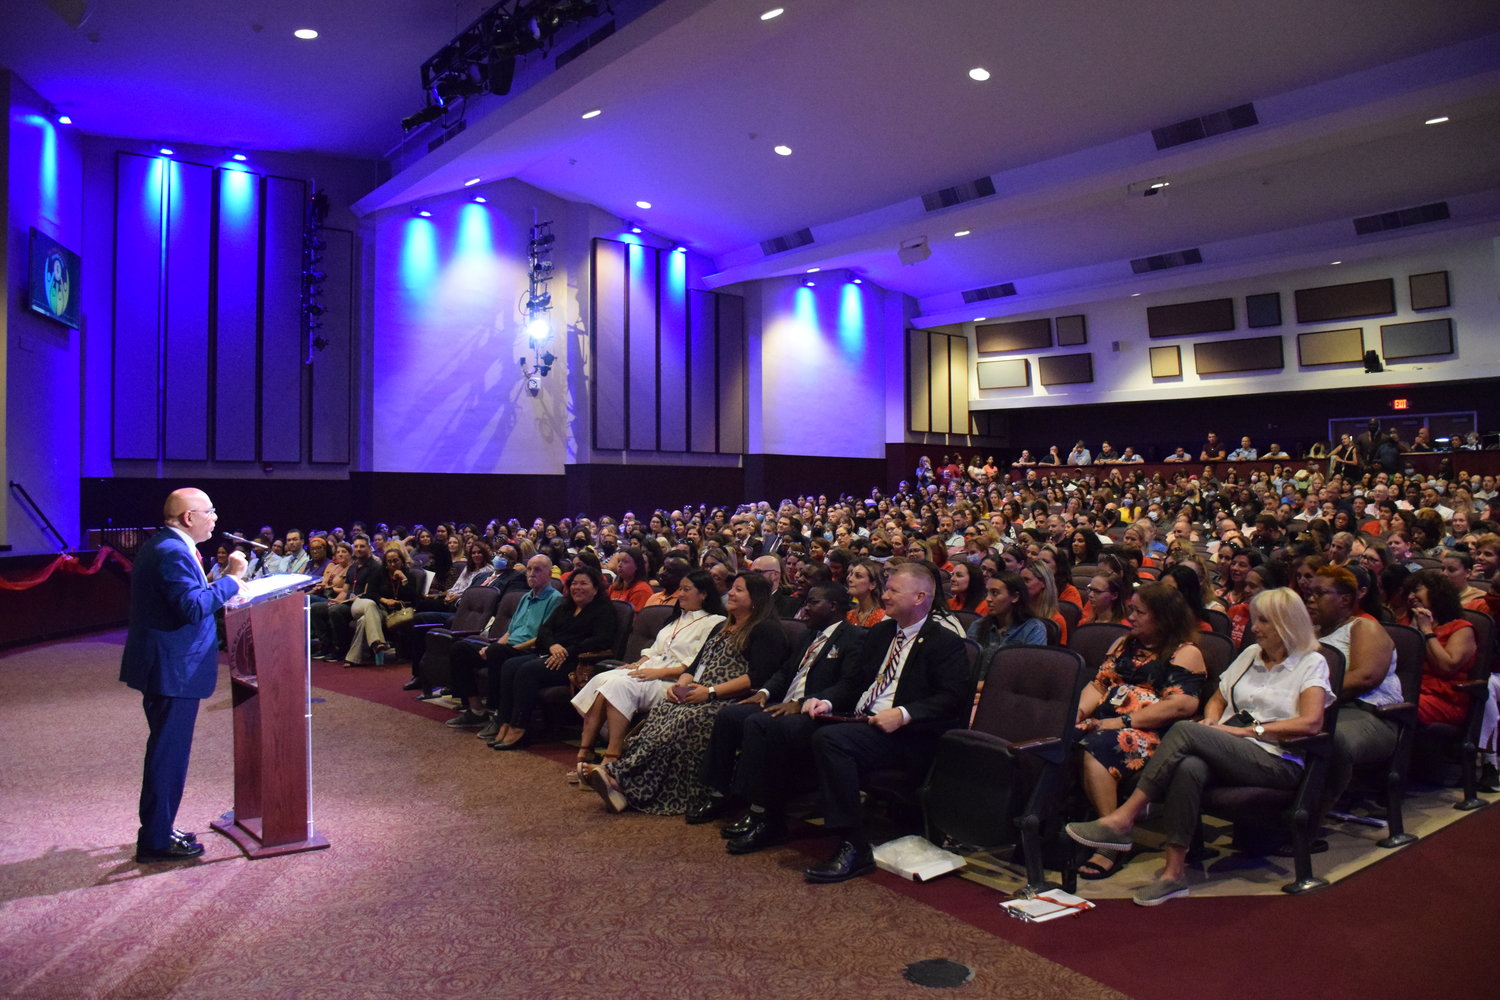 Superintendent of Schools Dr. Kishore Kuncham welcomed back Freeport Public Schools staff to the 2022-2023 school year at the Superintendent’s Conference Day.